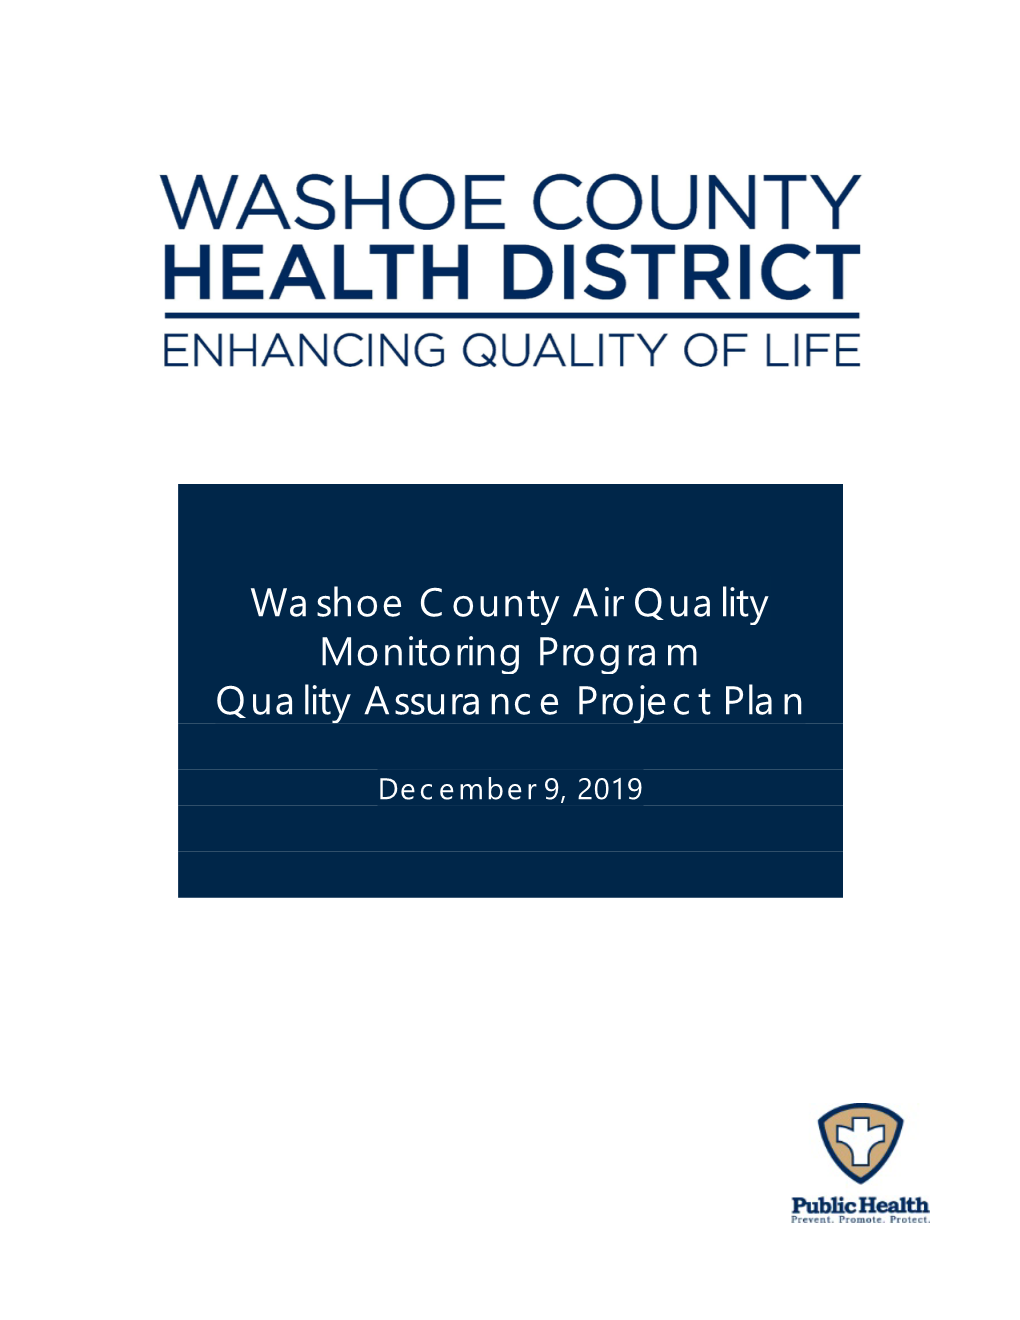 Washoe County 2019 Quality Assurance Project Plan